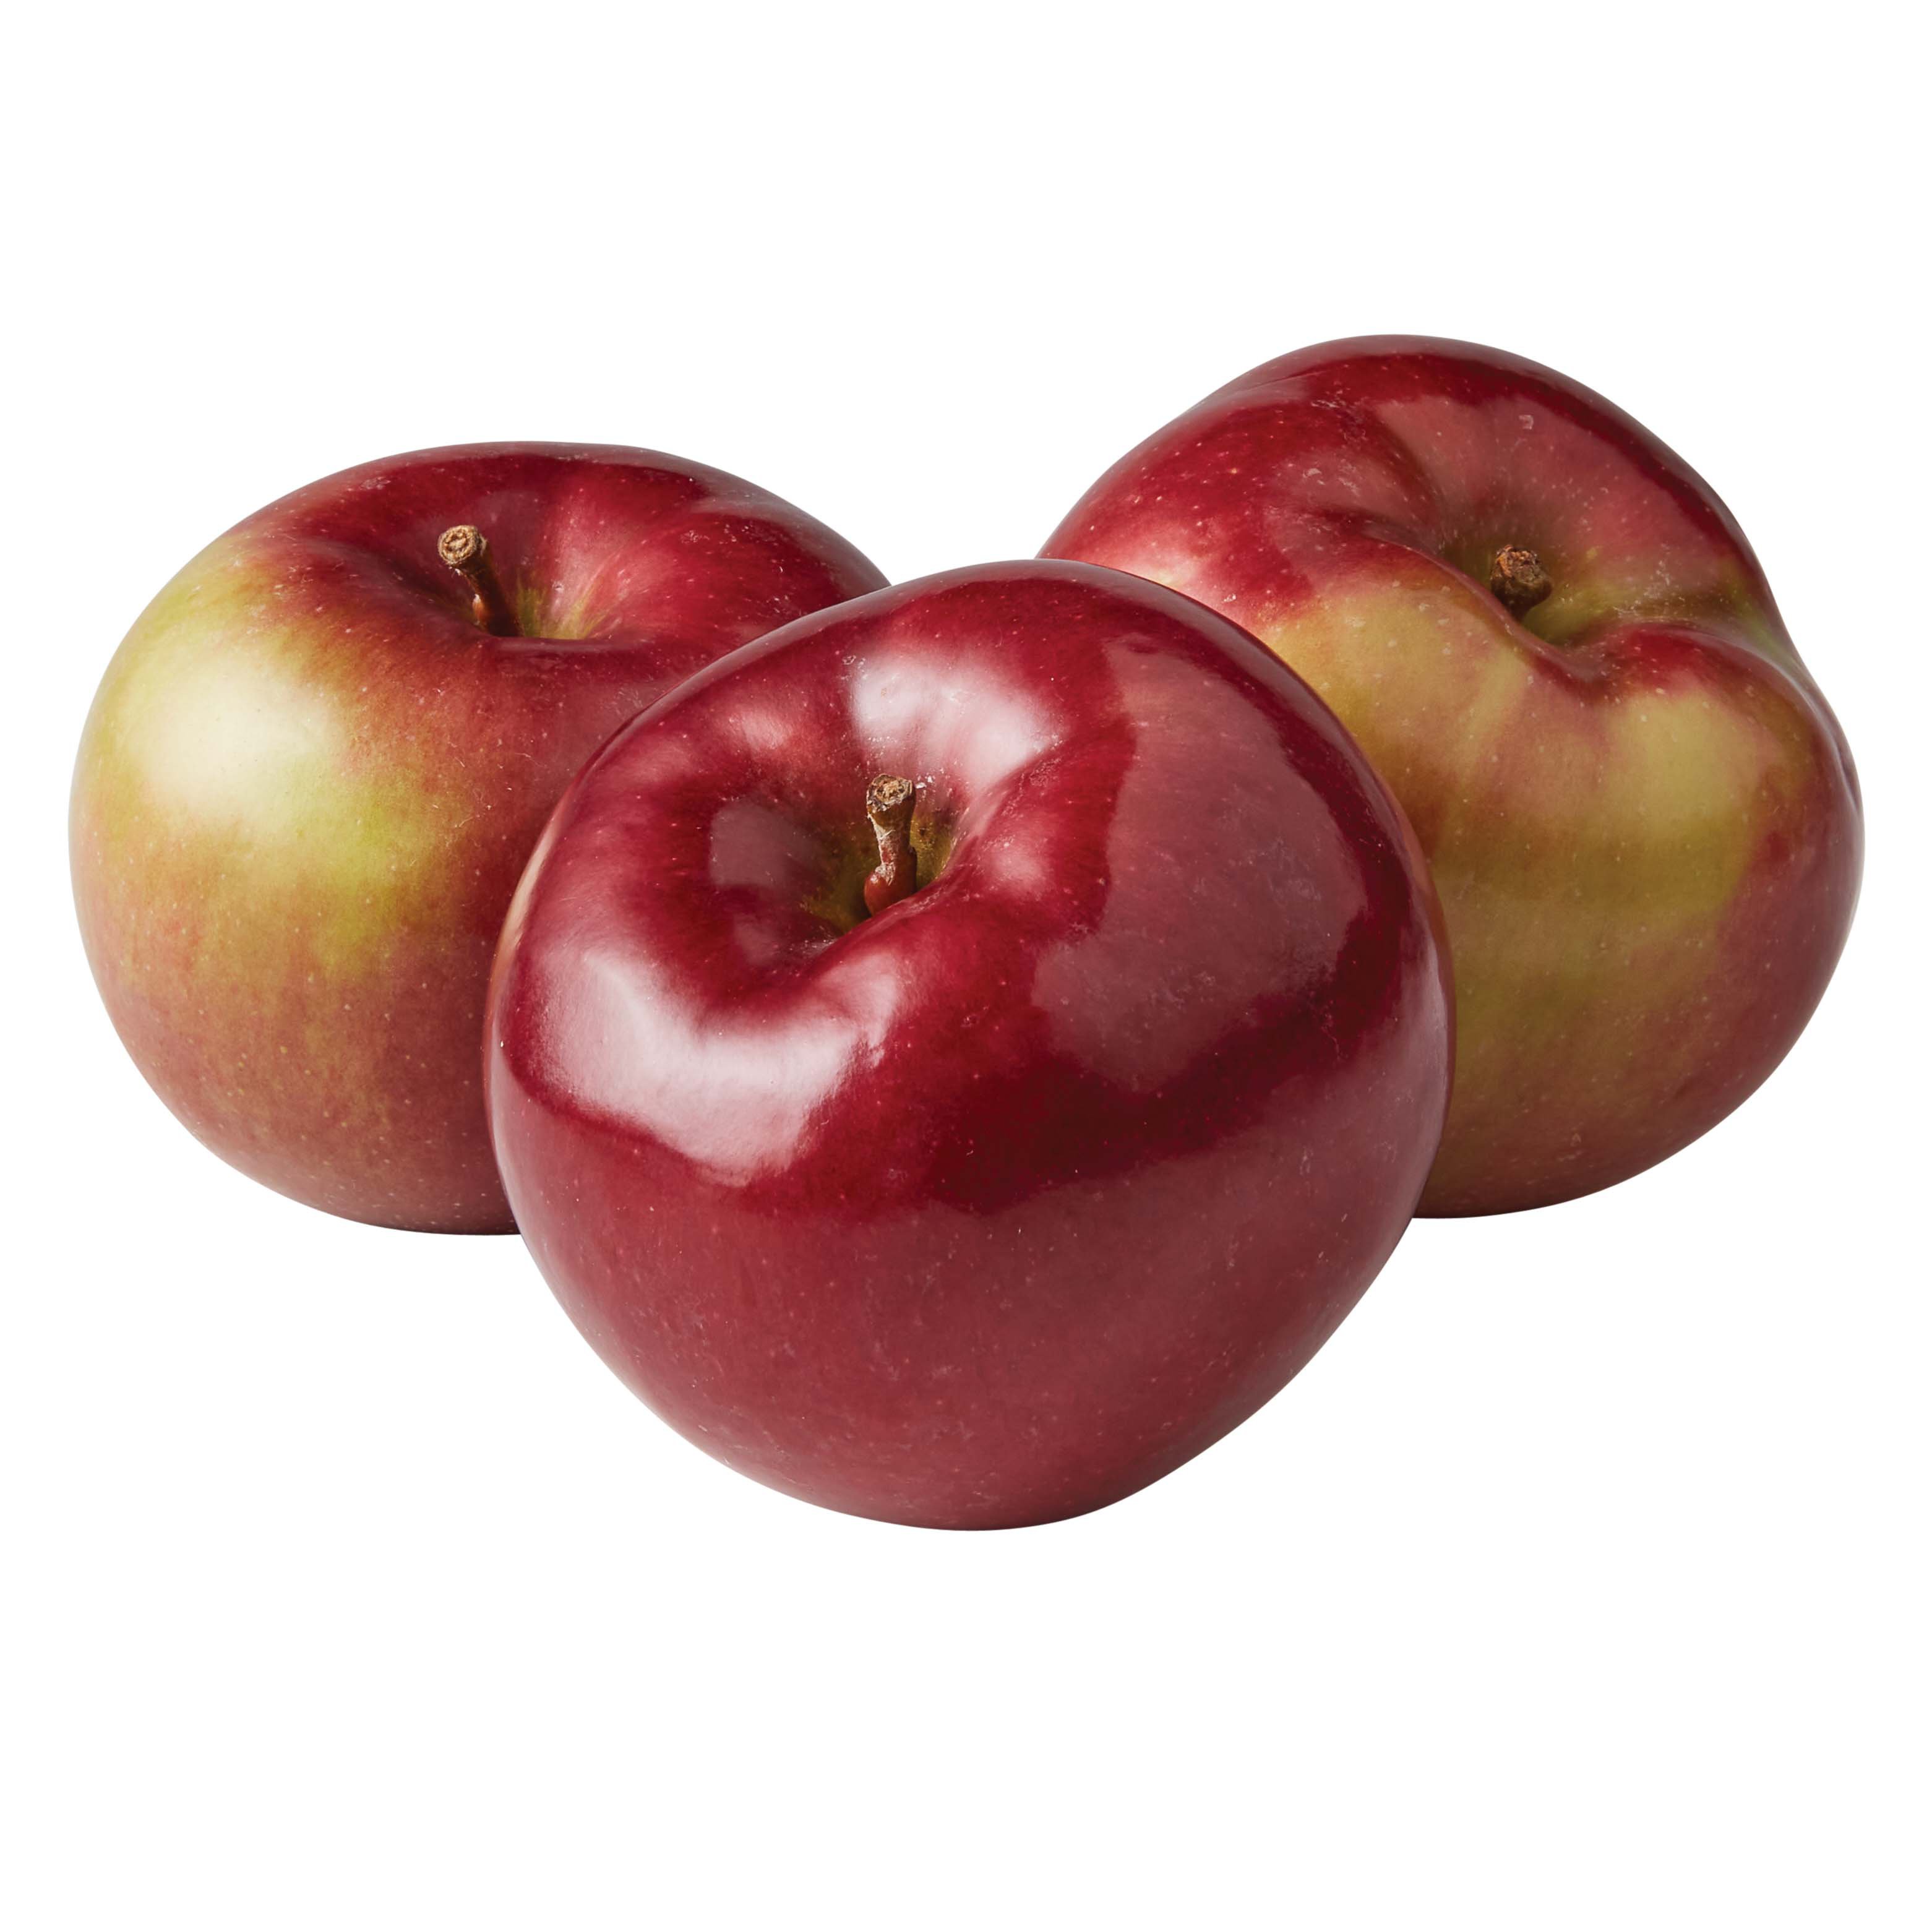 Different Types of Apples (with Photos!)